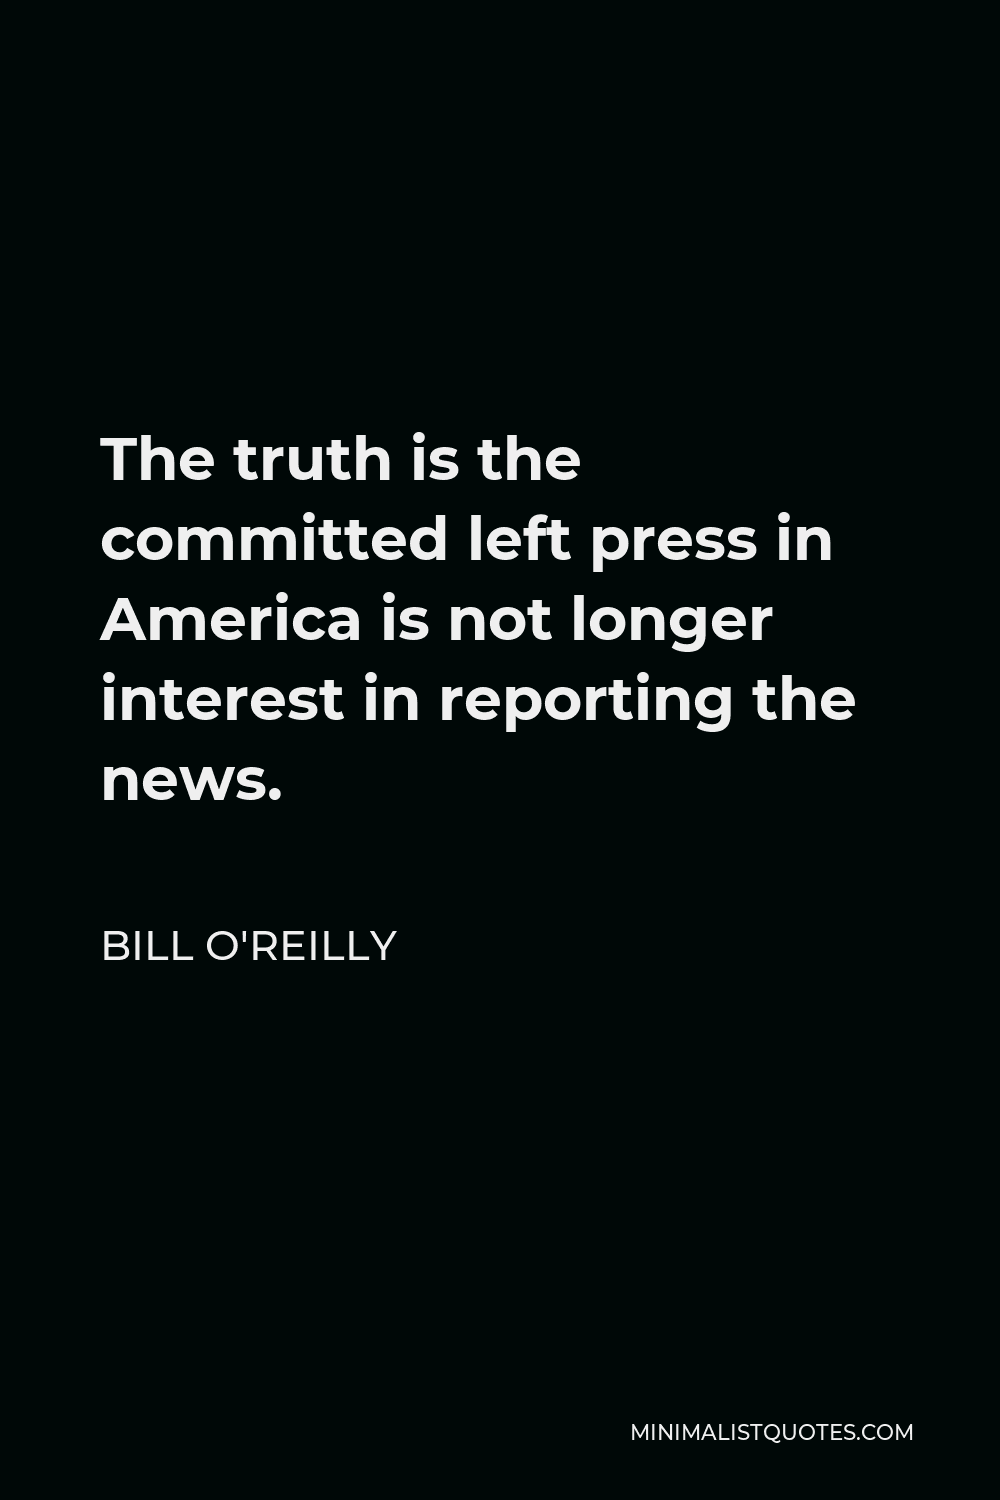 Bill O'Reilly Quote - The truth is the committed left press in America is not longer interest in reporting the news.